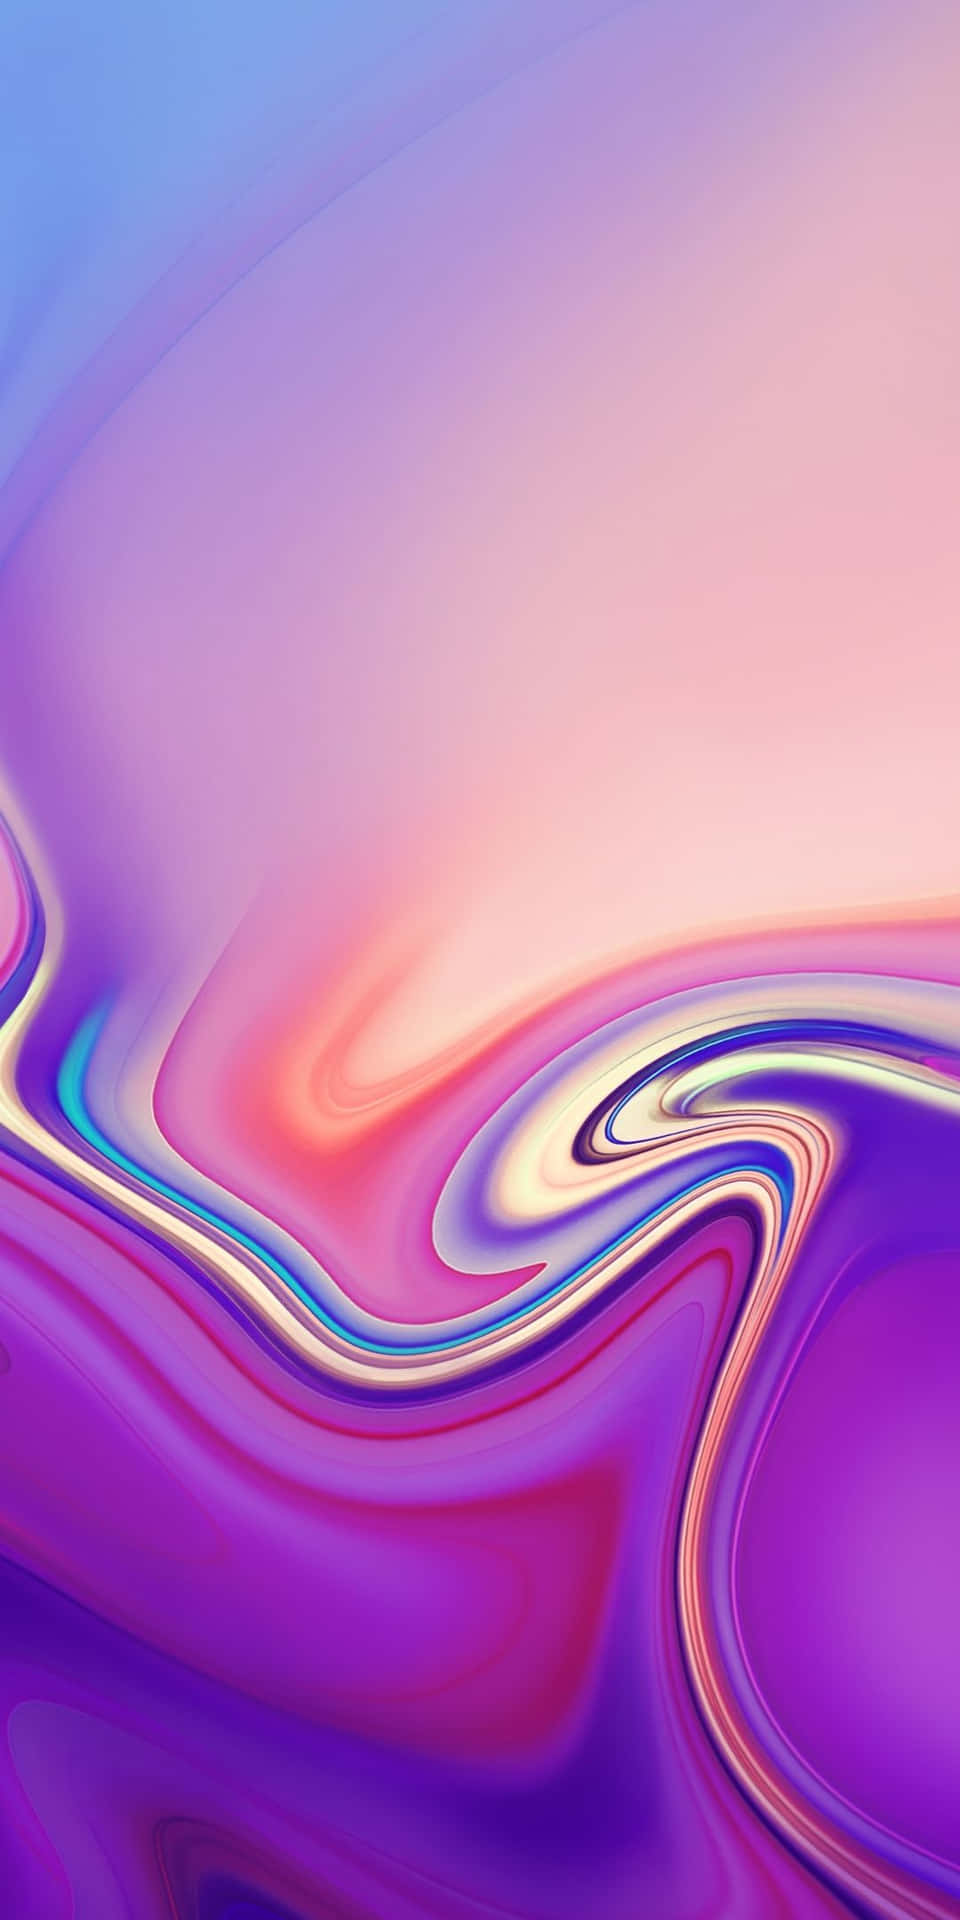 Capture stunning photos with Samsung Galaxy Note 10 Plus Wallpaper